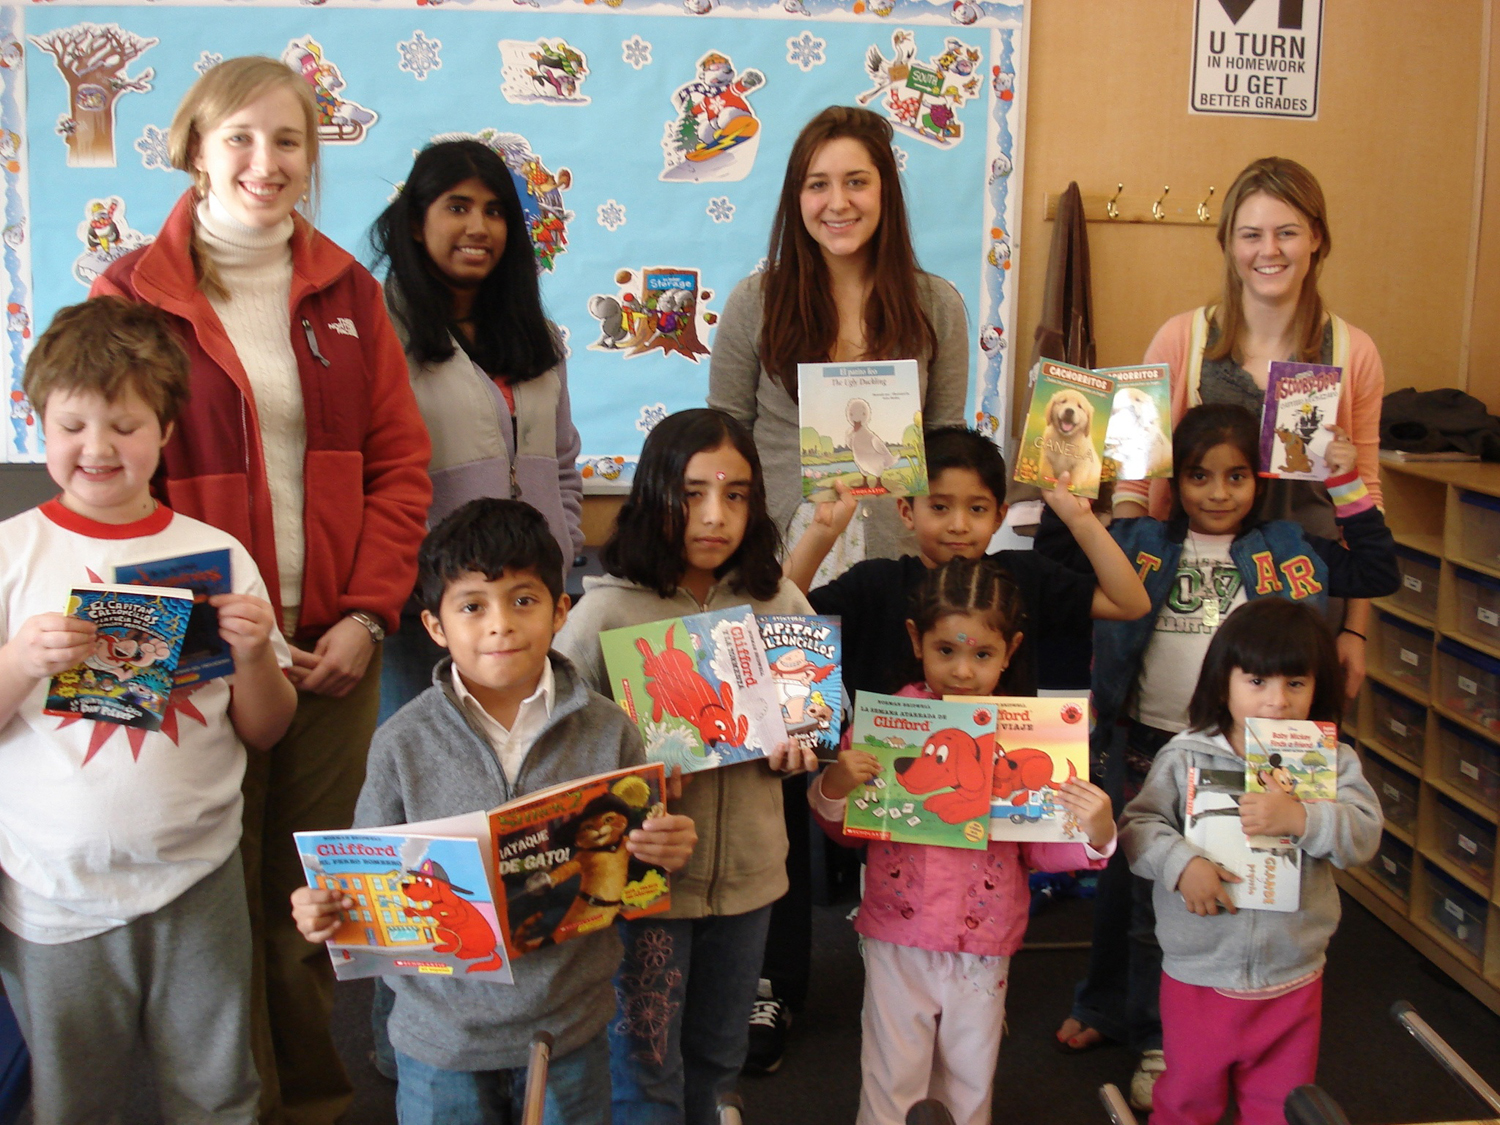 Group photo left to right: Sarah Yates, Priya Komma, Alexandra Hootnick and Claire Kugler stand with a punch of small children holding books